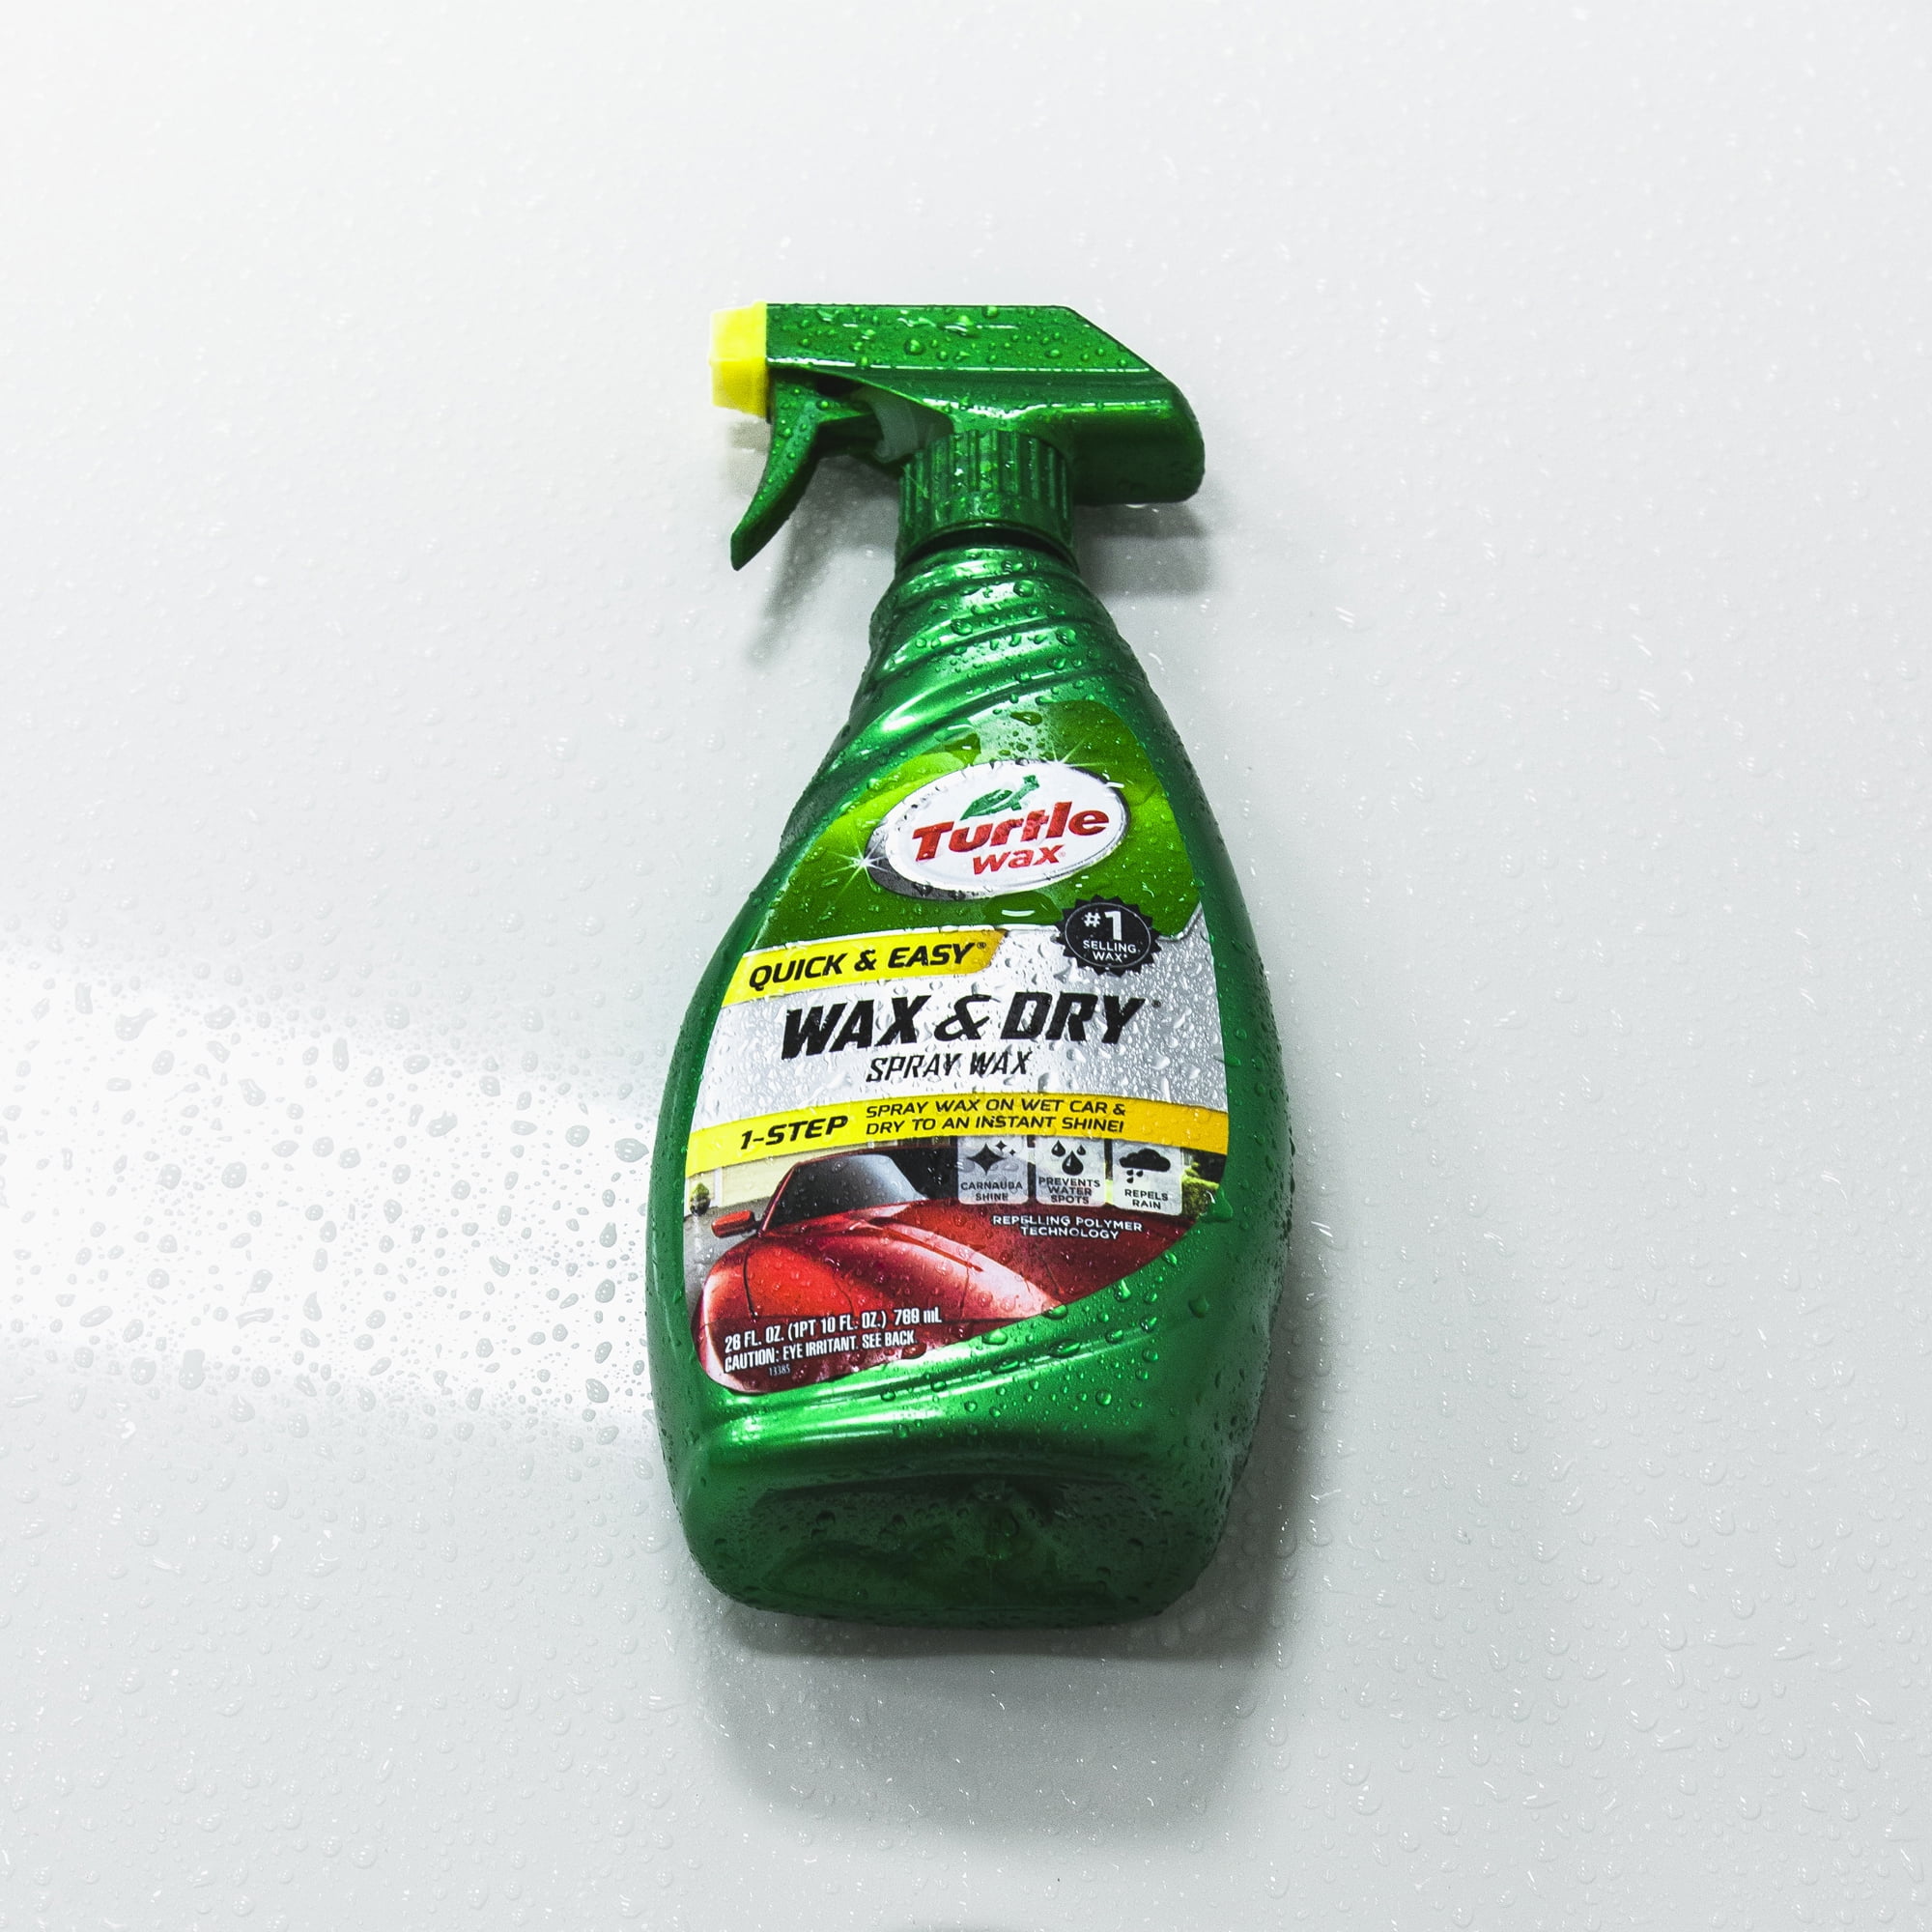 In one line, just wash your car, spray - Turtle Wax India